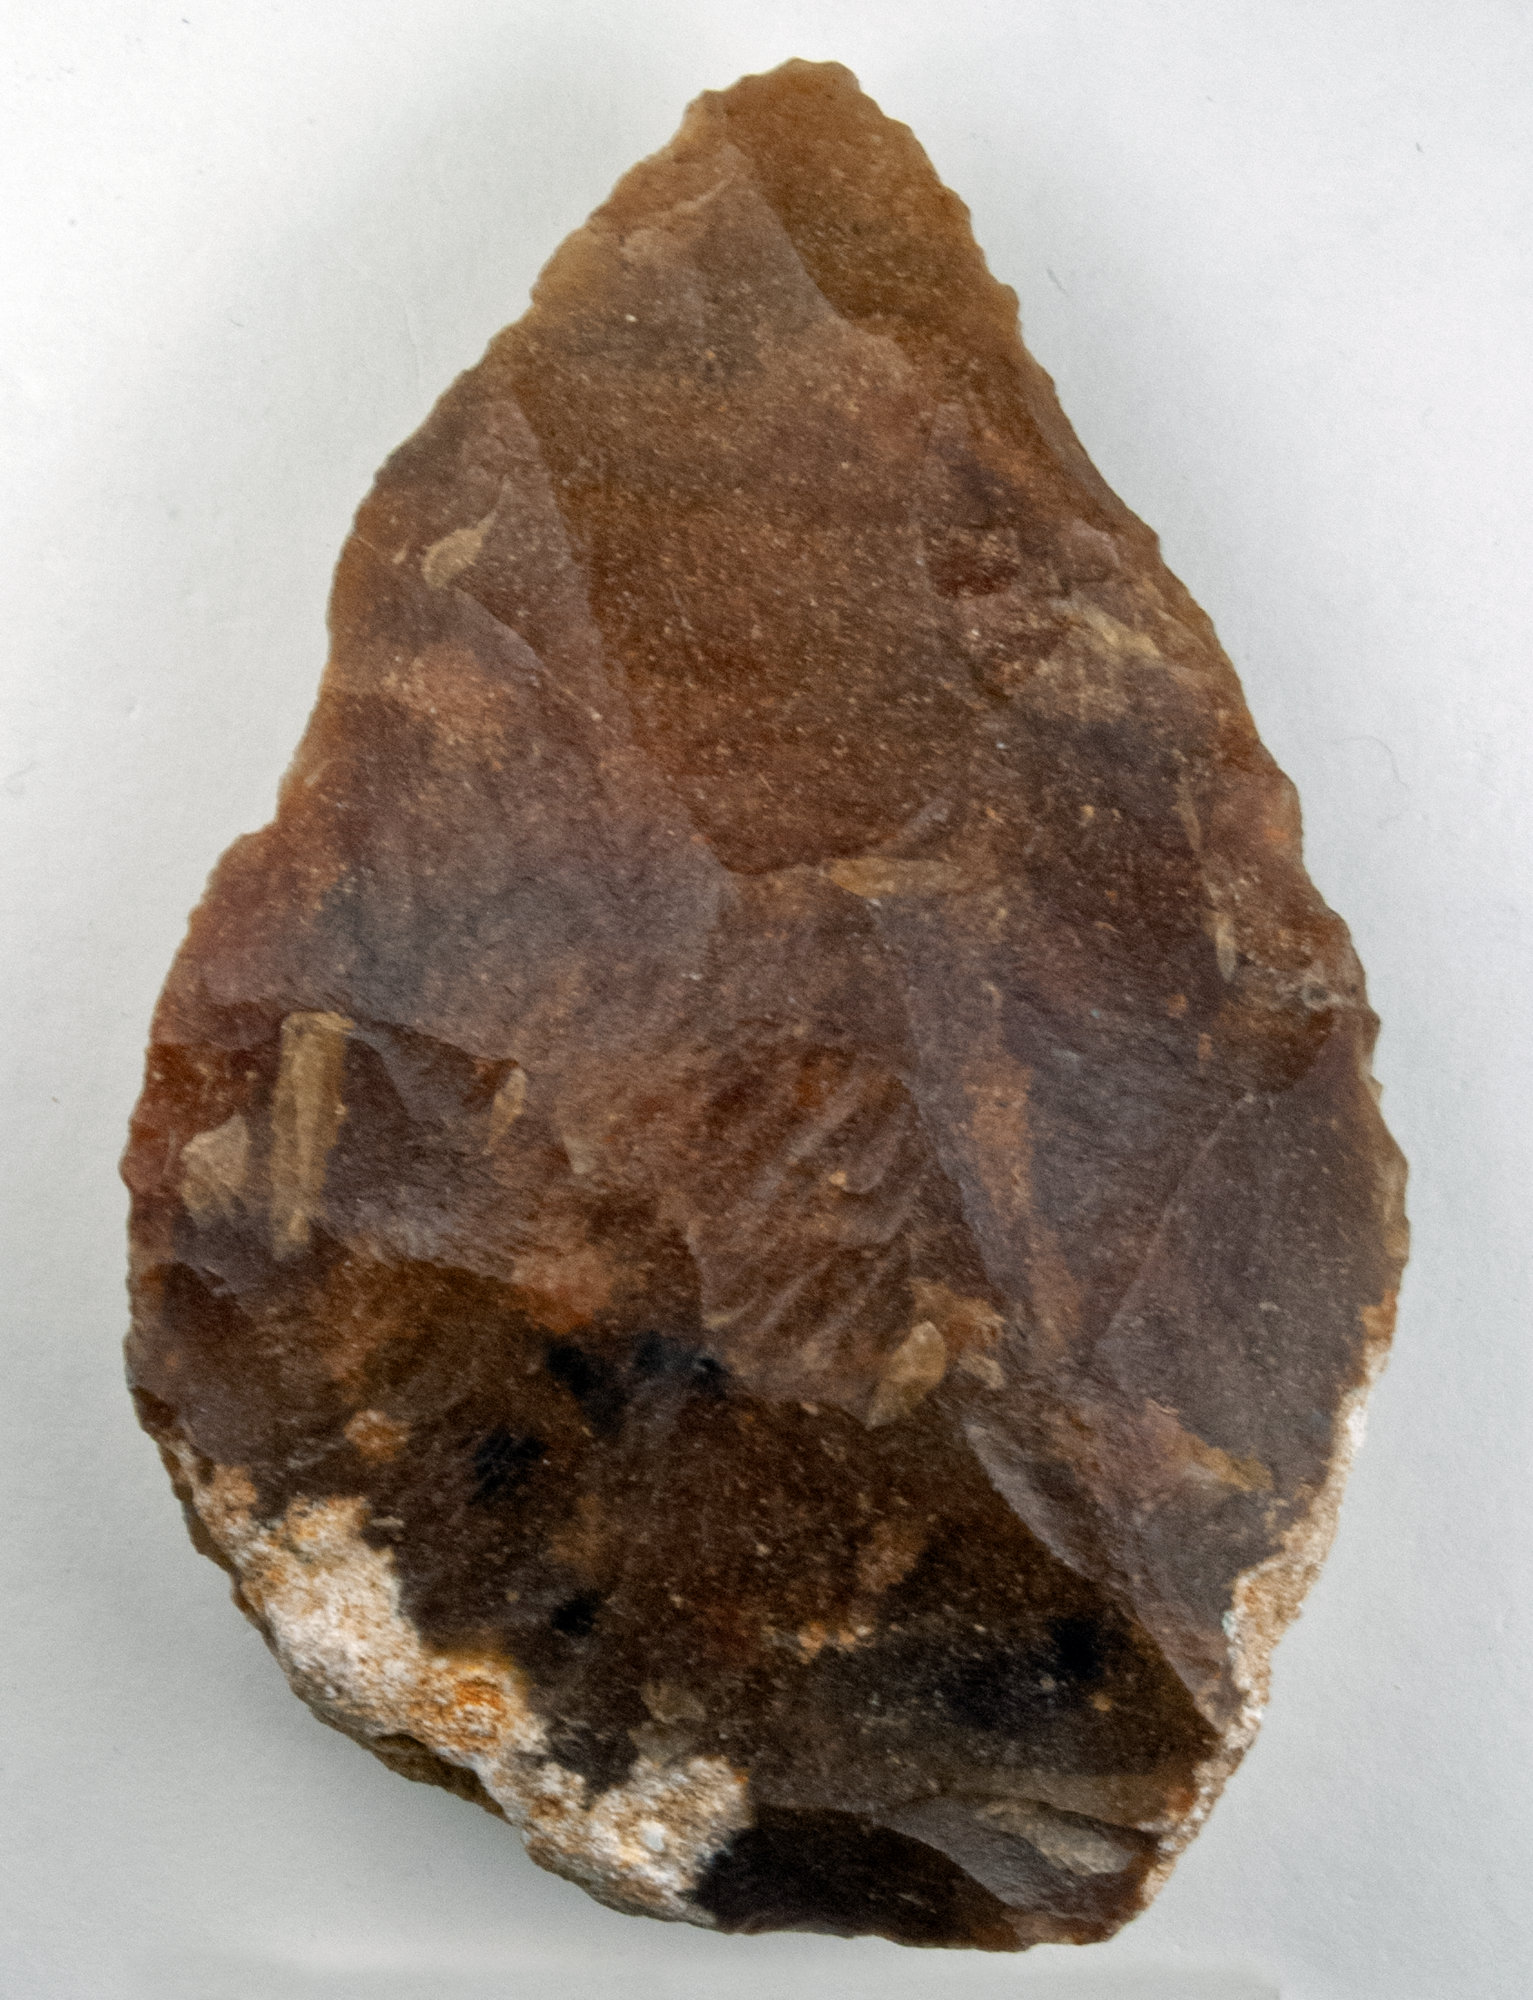 Enslaving chain For a Handaxe: On the Basis of Longevity and Invention by Jacob Sam-La Rose